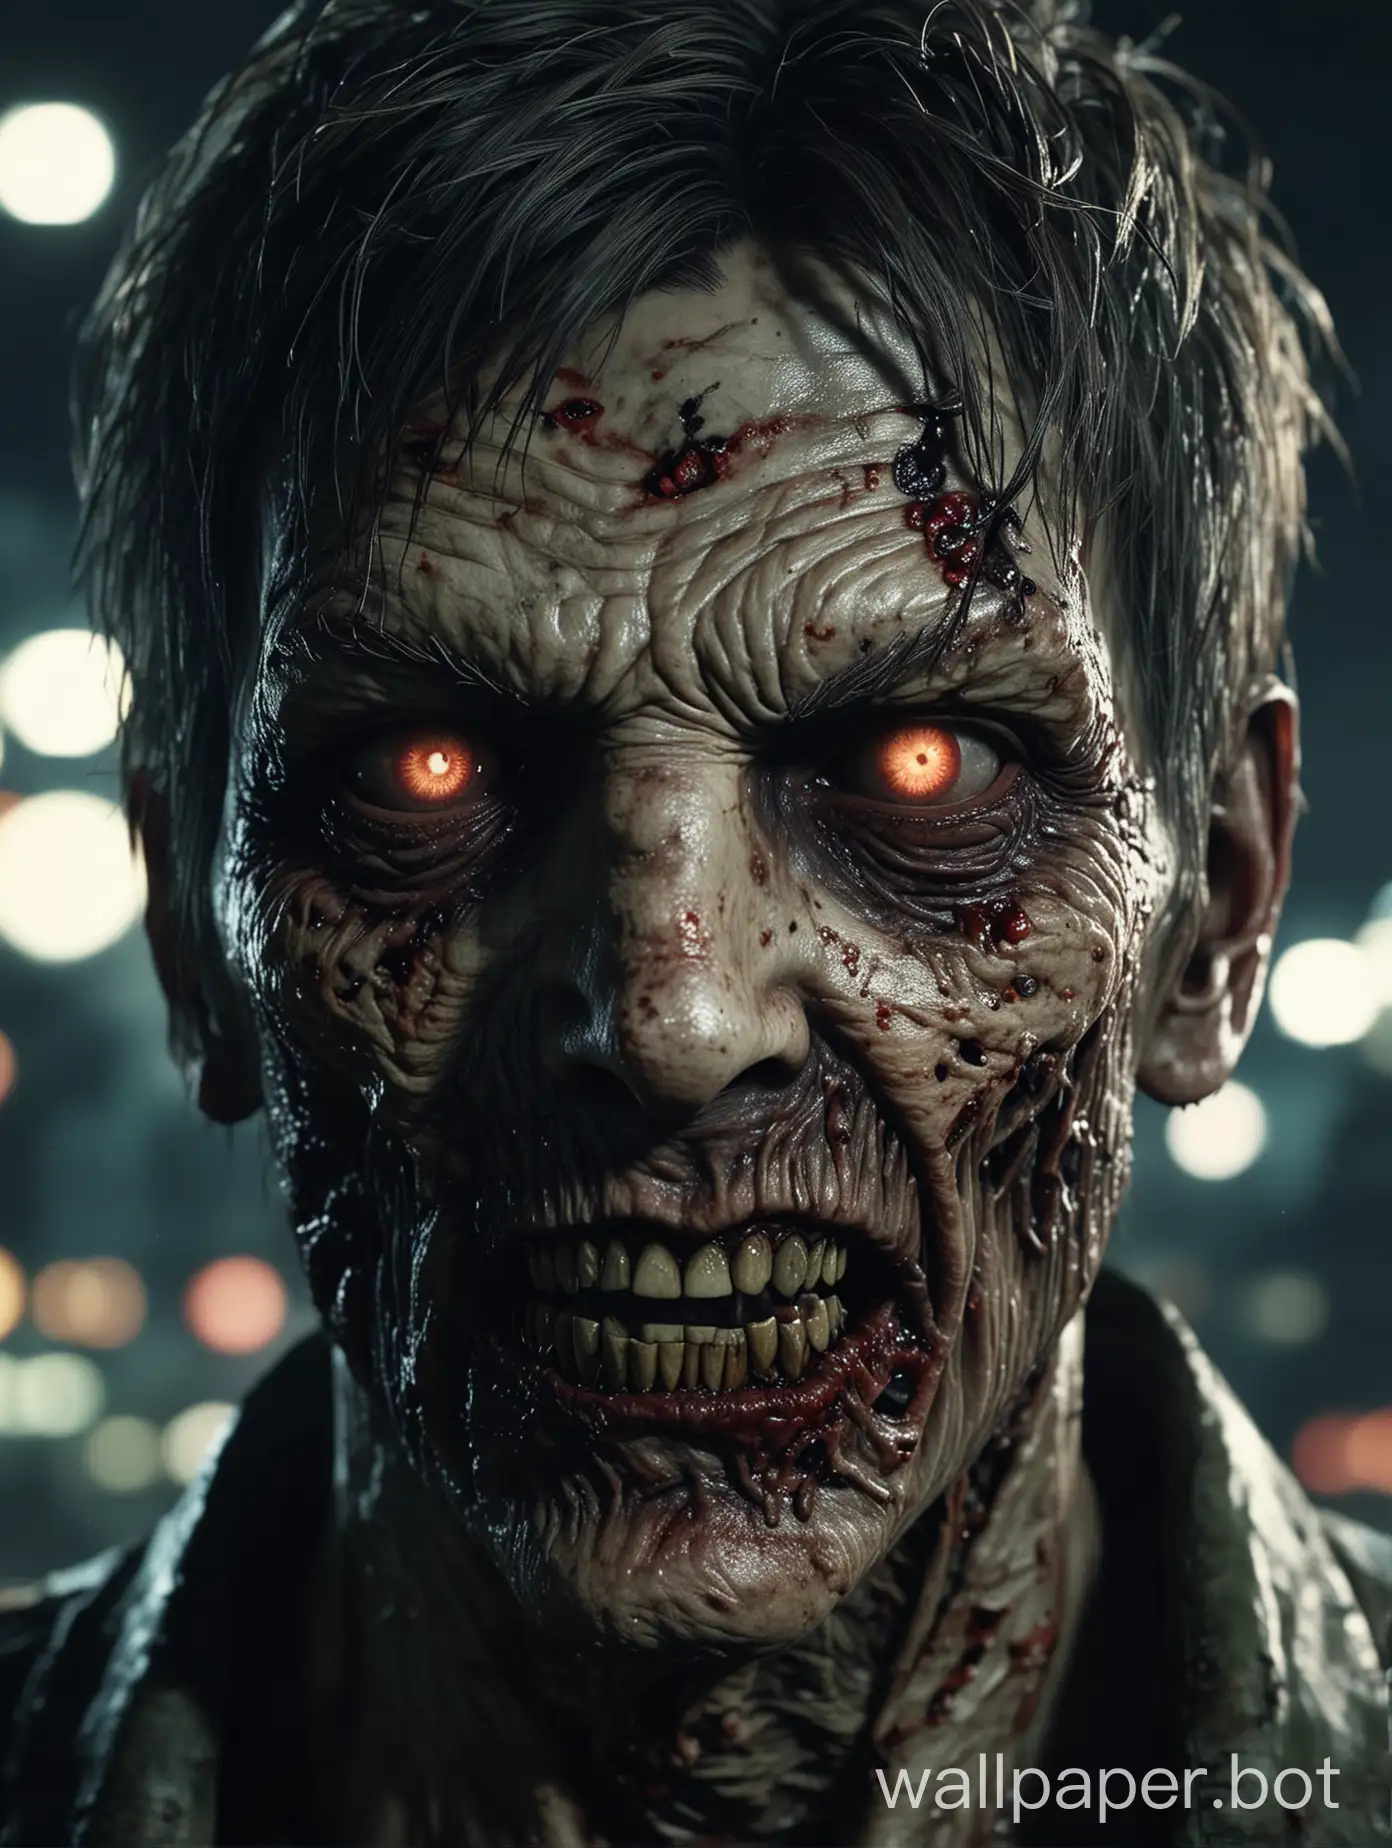 Close-up of a creepy zombie face, resident evil, highly detailed game character with sharp eyes and a gentle smile, against a blurred night cityscape background